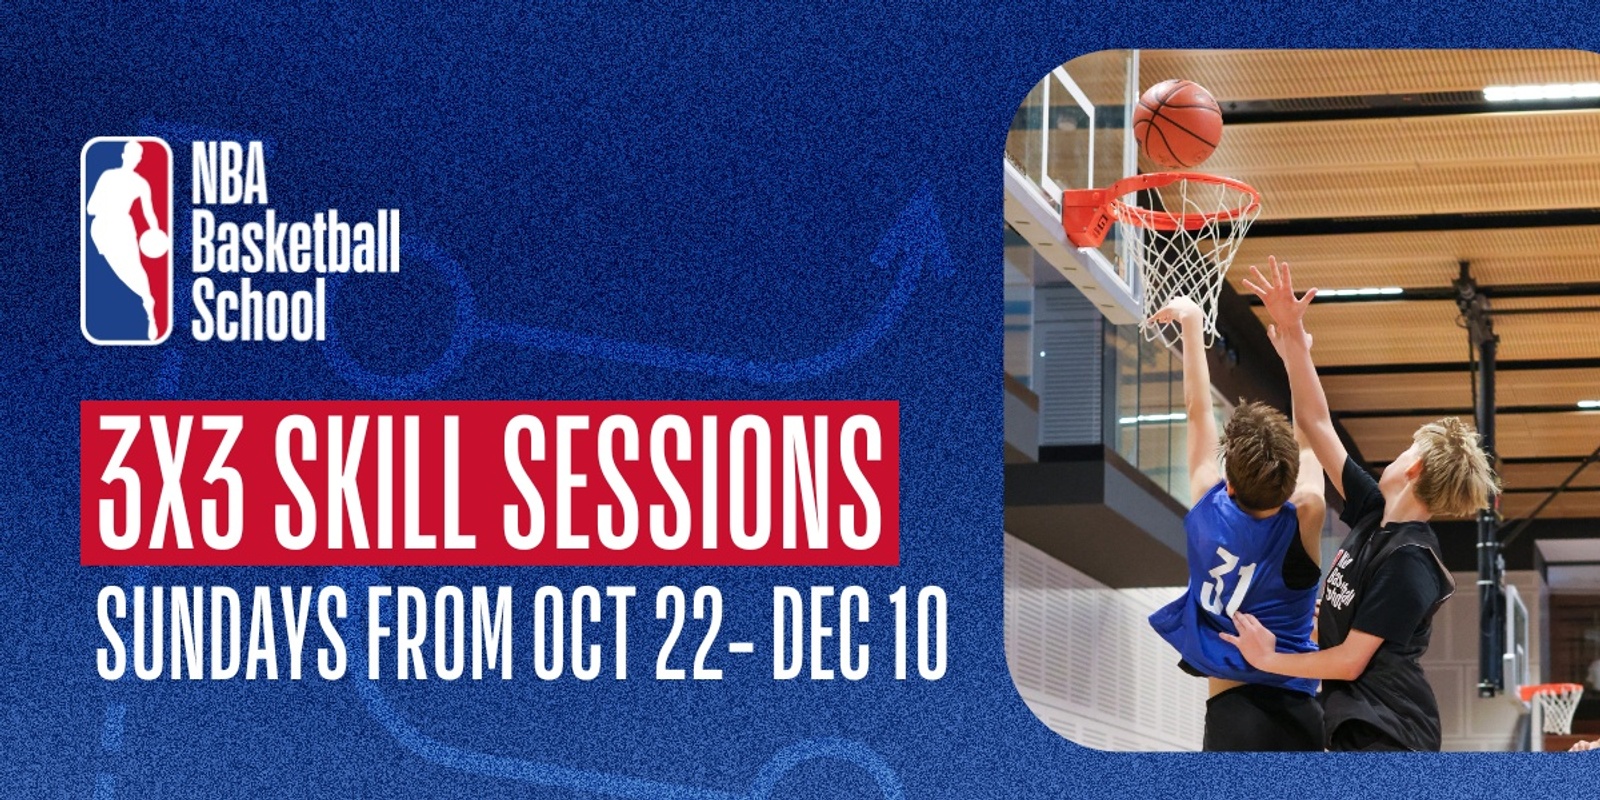 Banner image for Term 4: 3x3 Skill Sessions in Sydney at NBA Basketball School Australia 2023